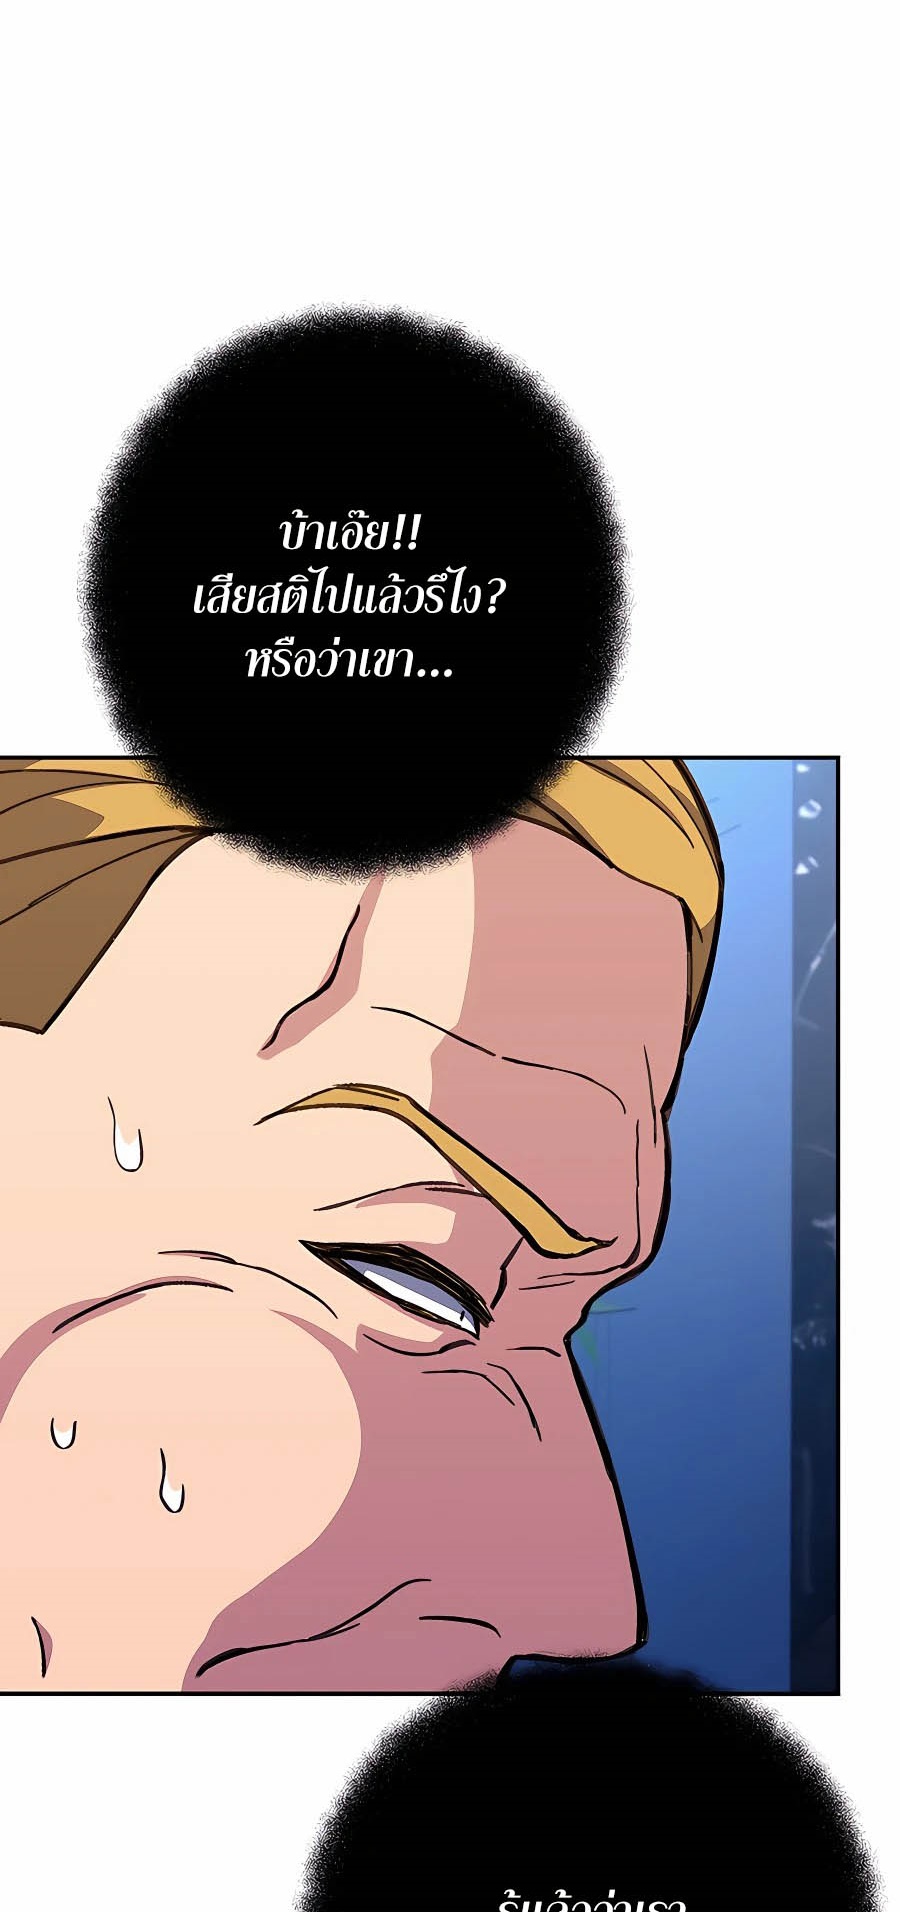 à¸­à¹ˆà¸²à¸™à¸¡à¸±à¸™à¸®à¸§à¸² à¹€à¸£à¸·à¹ˆà¸­à¸‡ The Part Time Land of the Gods 56 30